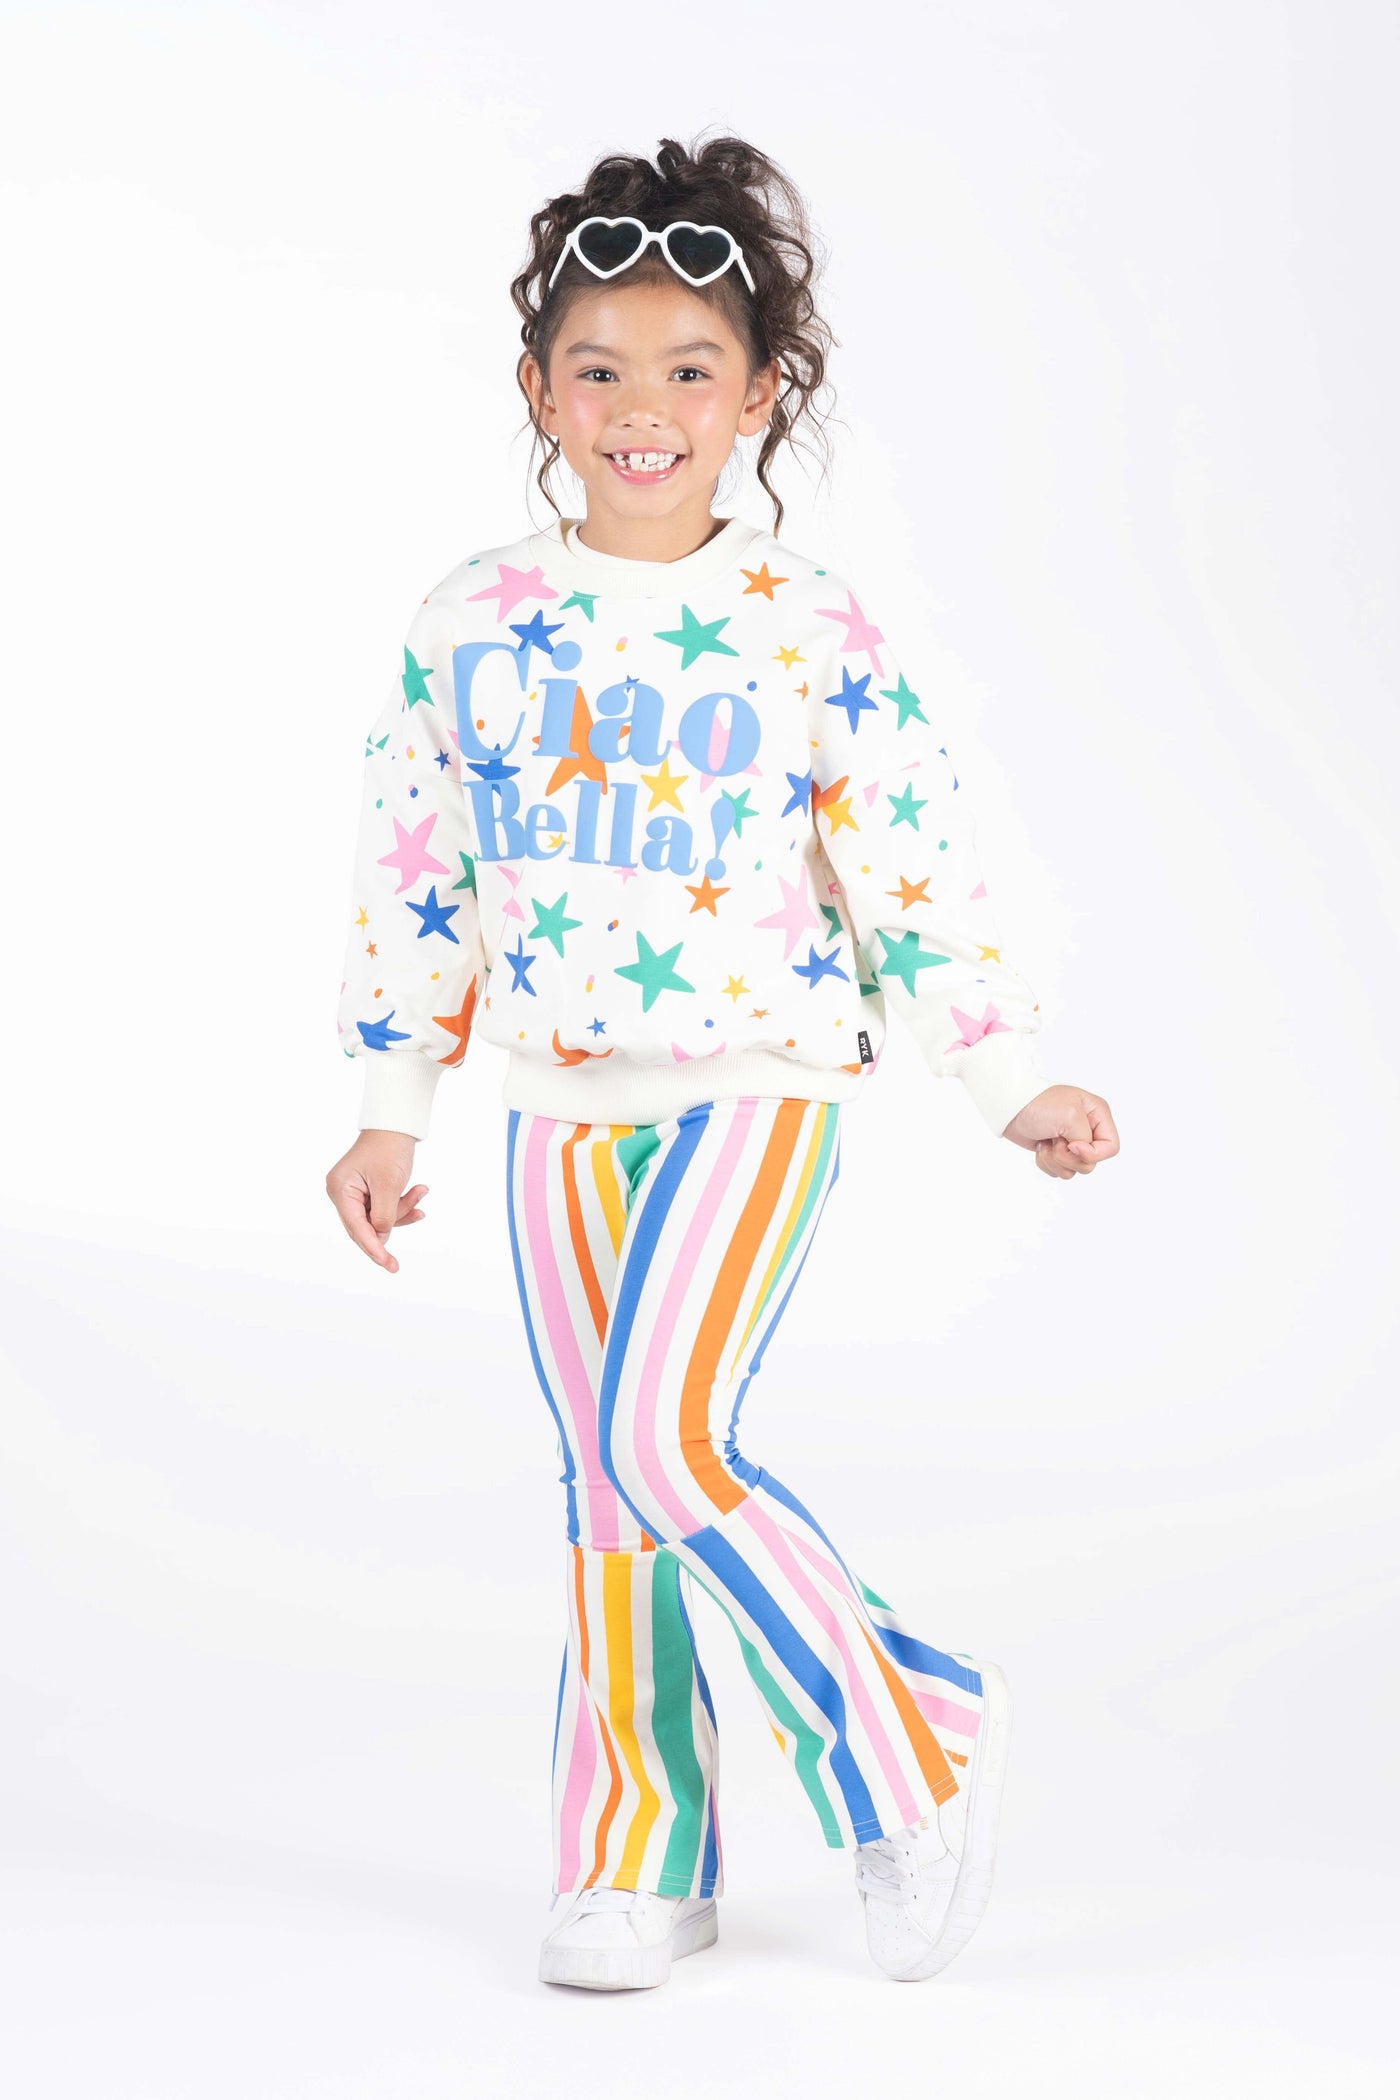 Rock Your Baby Rainbow Stripes High Waisted Flares Flares Rock Your Baby 